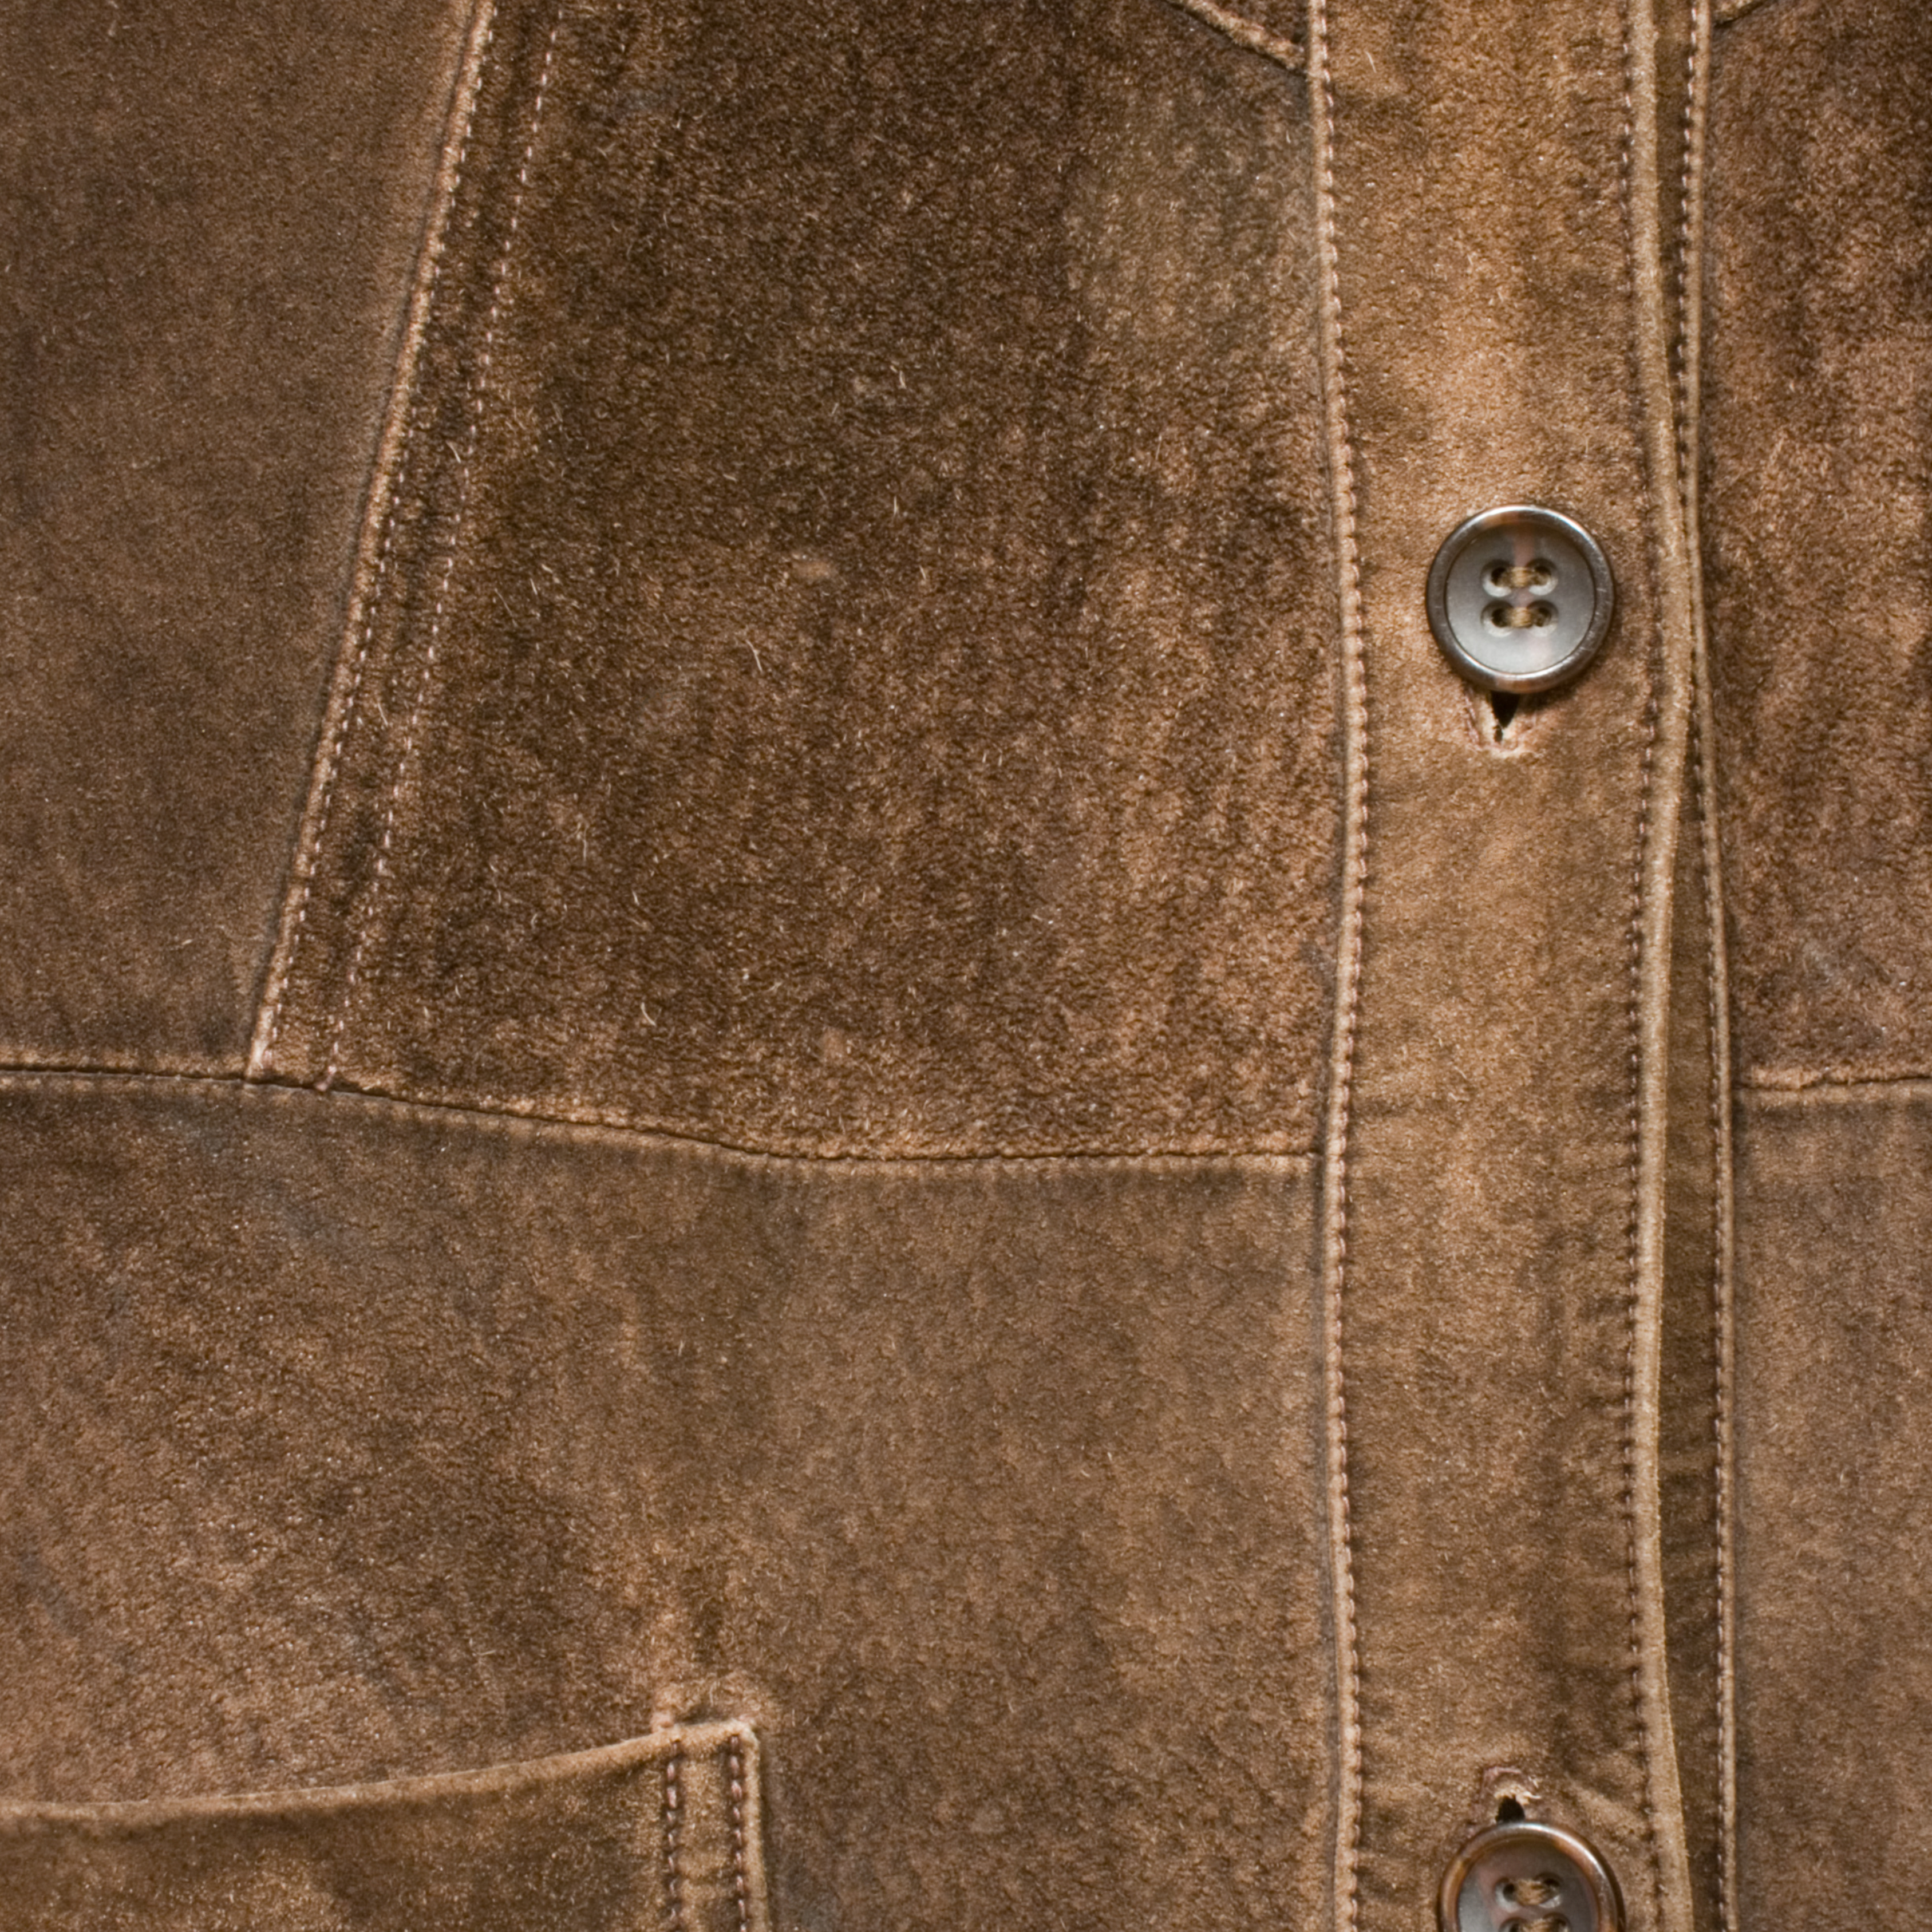 How To Clean Suede Leather Jackets